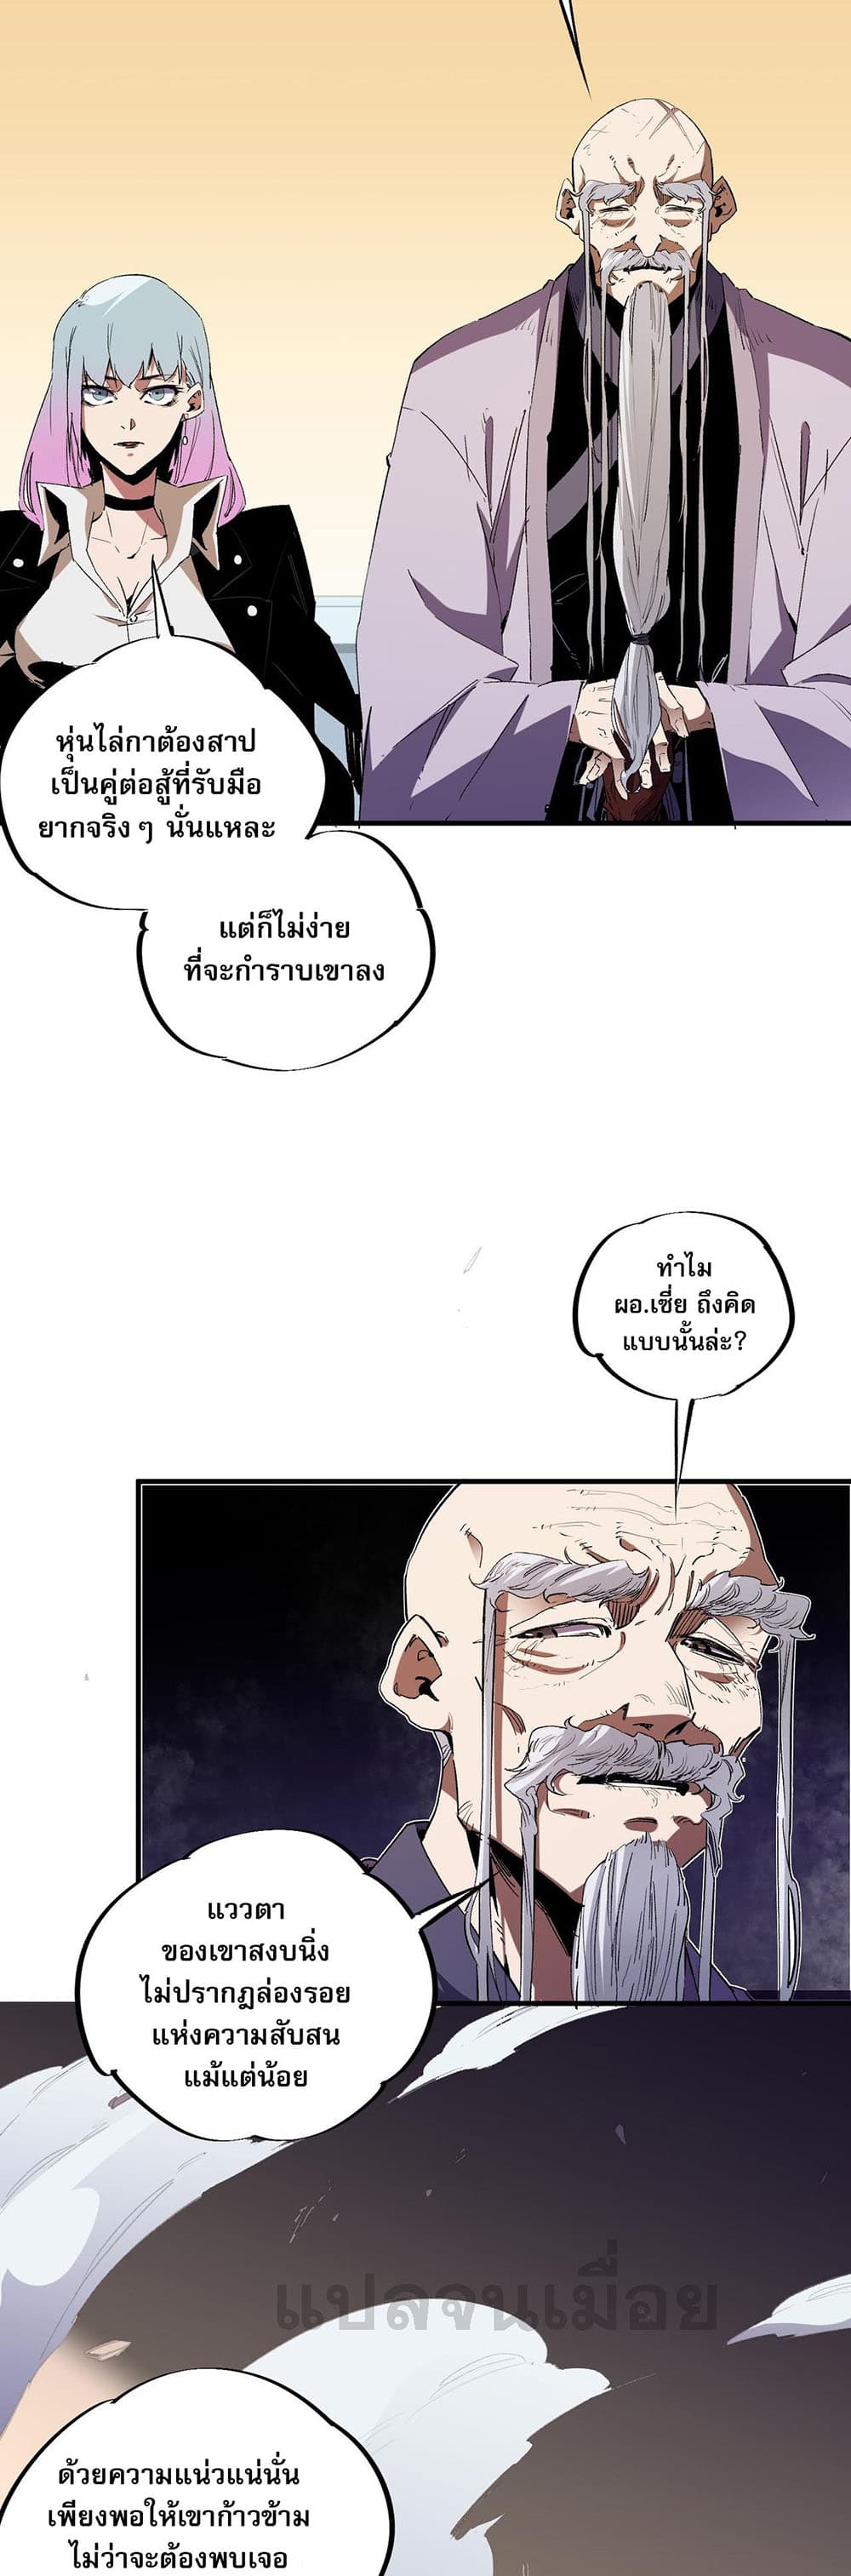 Job Changing for the Entire Population: The Jobless Me Will Terminate the Gods ฉันคือผู้เล่นไร้อาชีพที่สังหารเหล่าเทพ 16-16